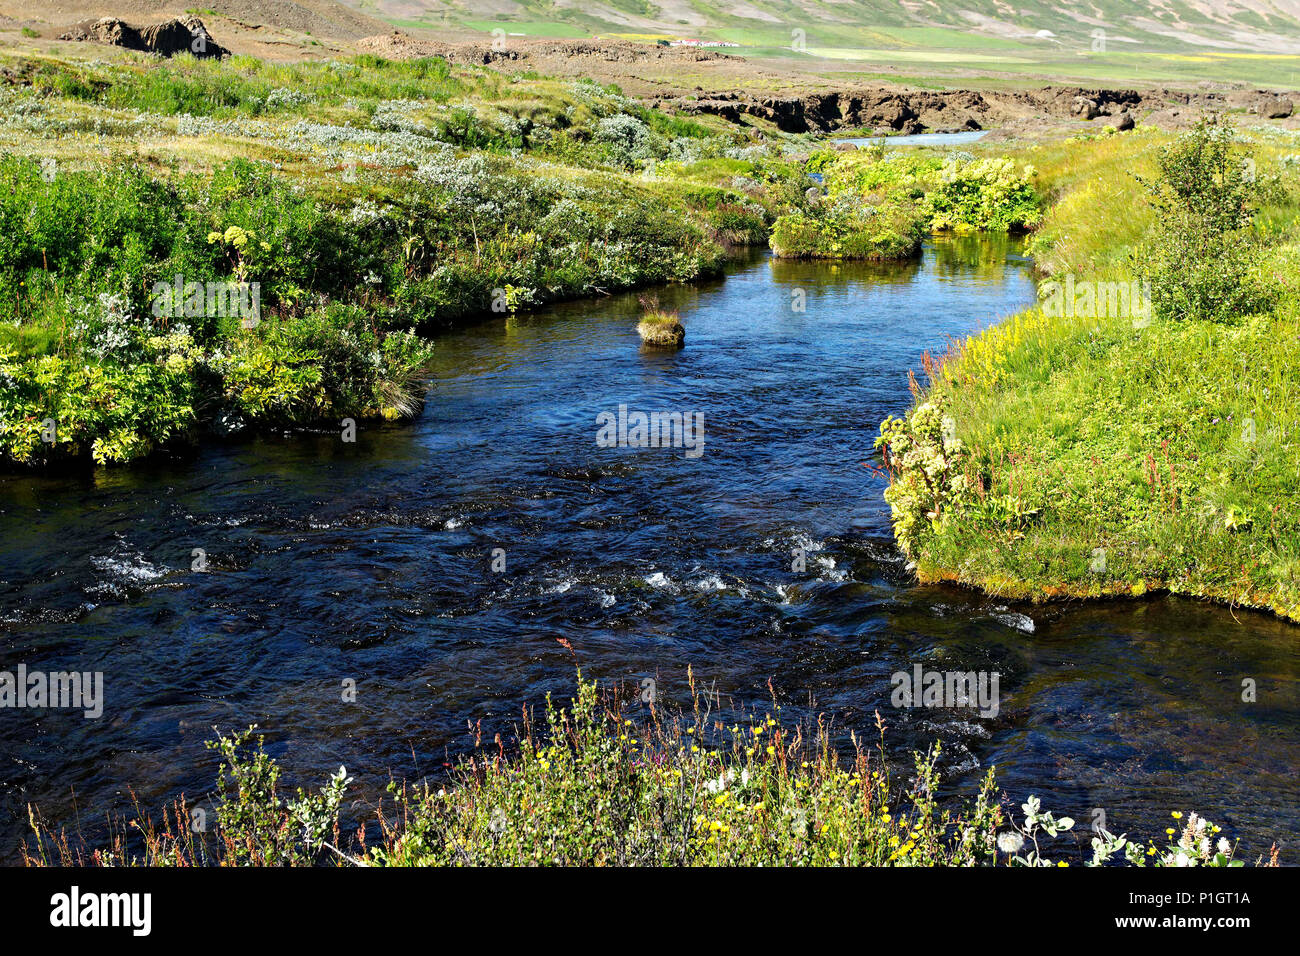 Free Images : rock, water, vacation, countryside, hill, forrest, plant,  green, natural landscape, fluvial landforms of streams, tree, watercourse,  riparian zone, groundcover, sky, mountain river, arroyo, bedrock, jungle,  creek, valley, temperate broadleaf